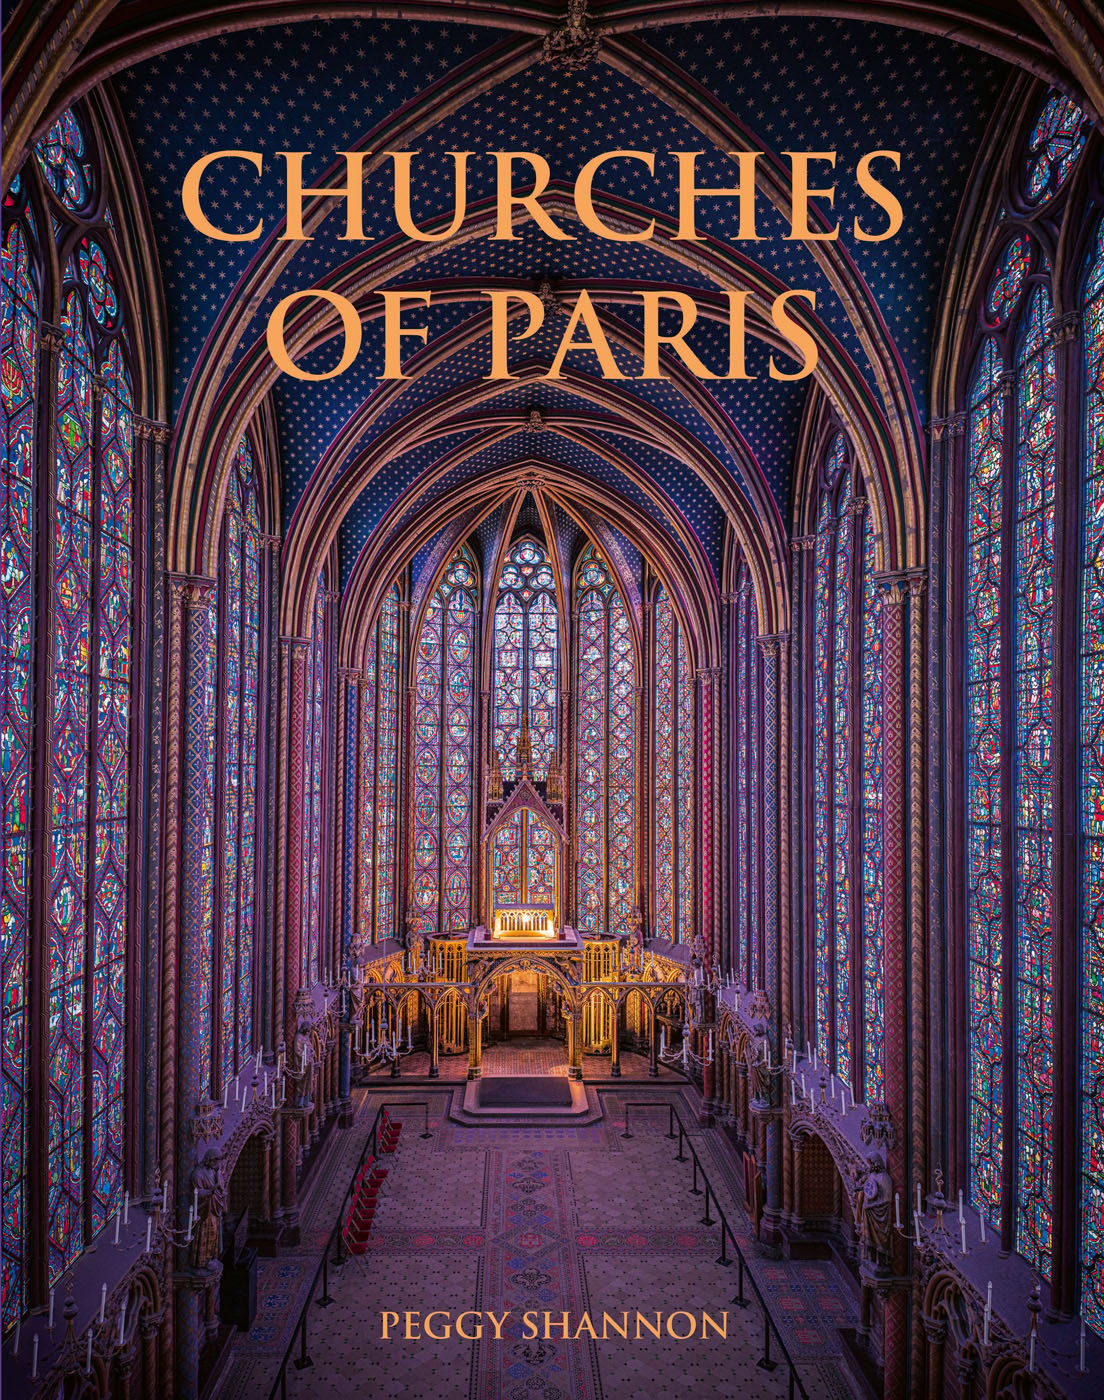 Gothic interior of Sainte-Chapelle in Paris, stained glass windows with fleurs de lys ceiling decoration, to cover of Churches of Paris.